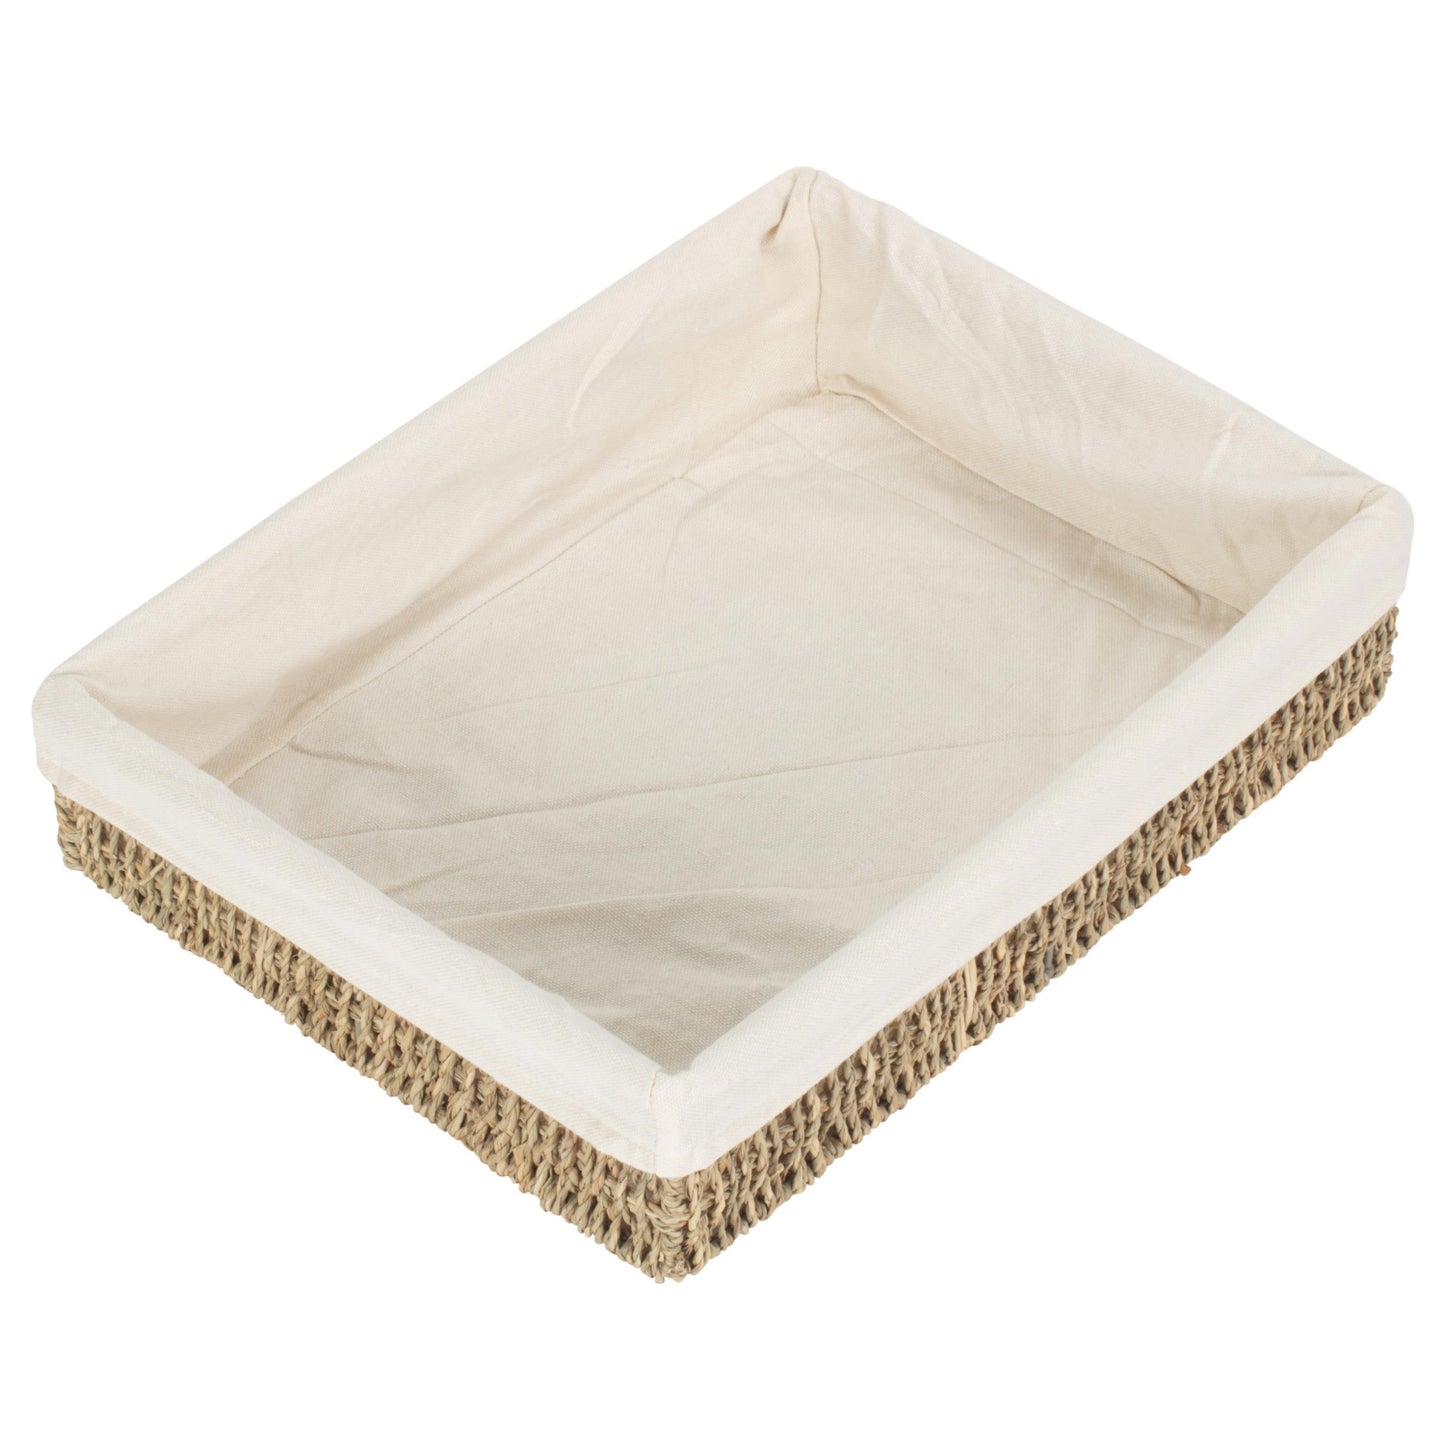 Large Lined Rectangular Seagrass Tray